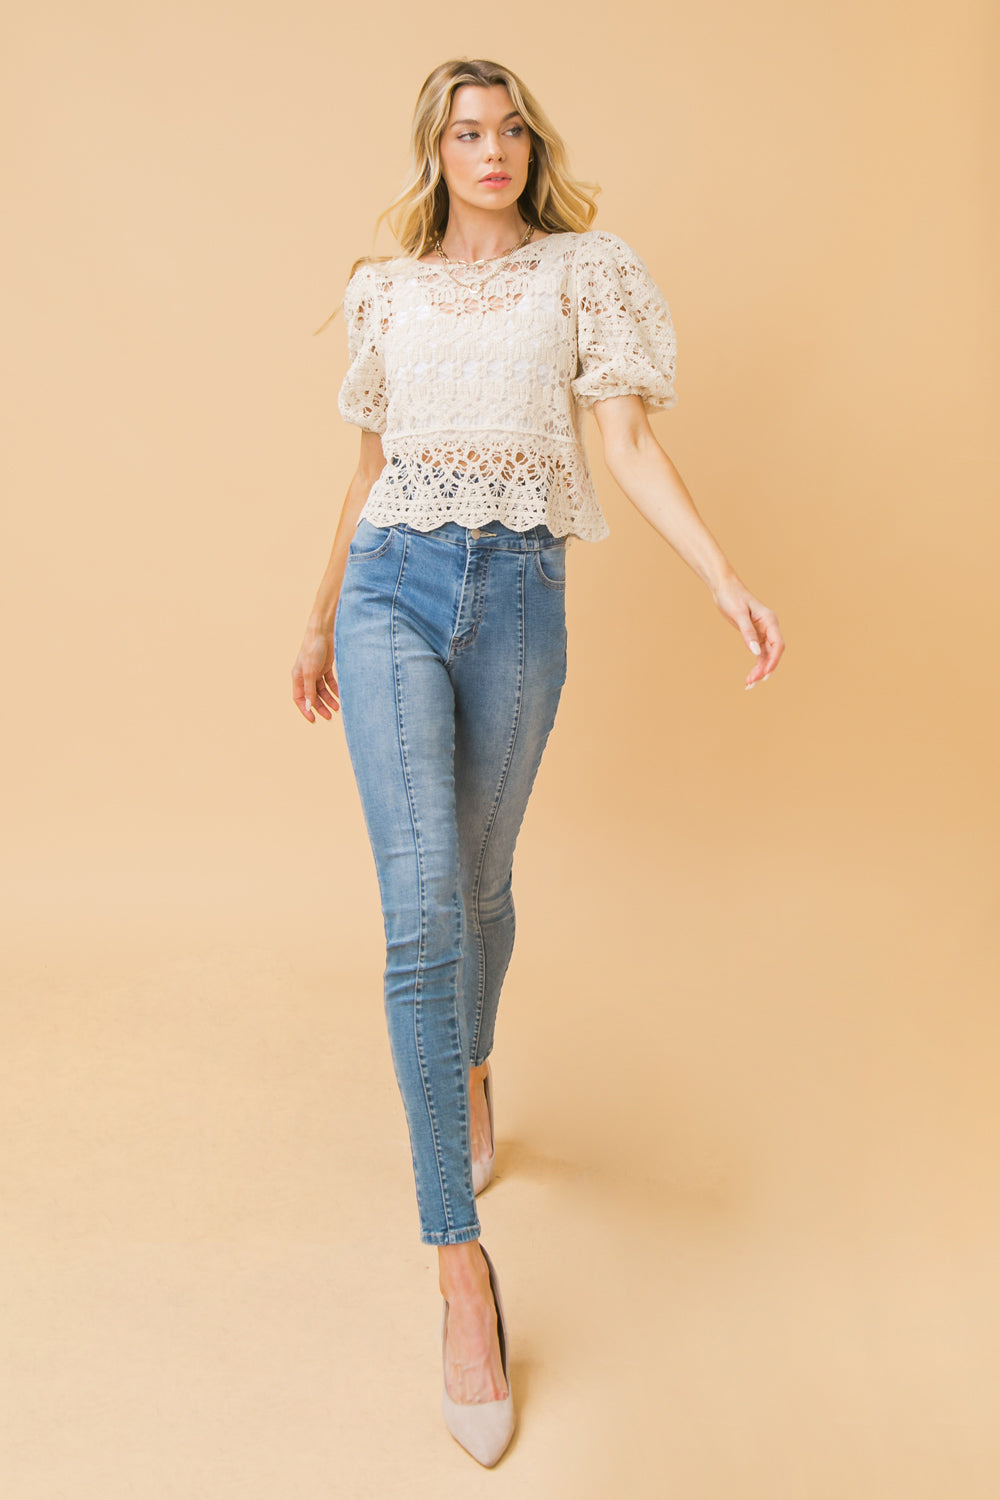 SINCERELY YOURS LACE CROP TOP